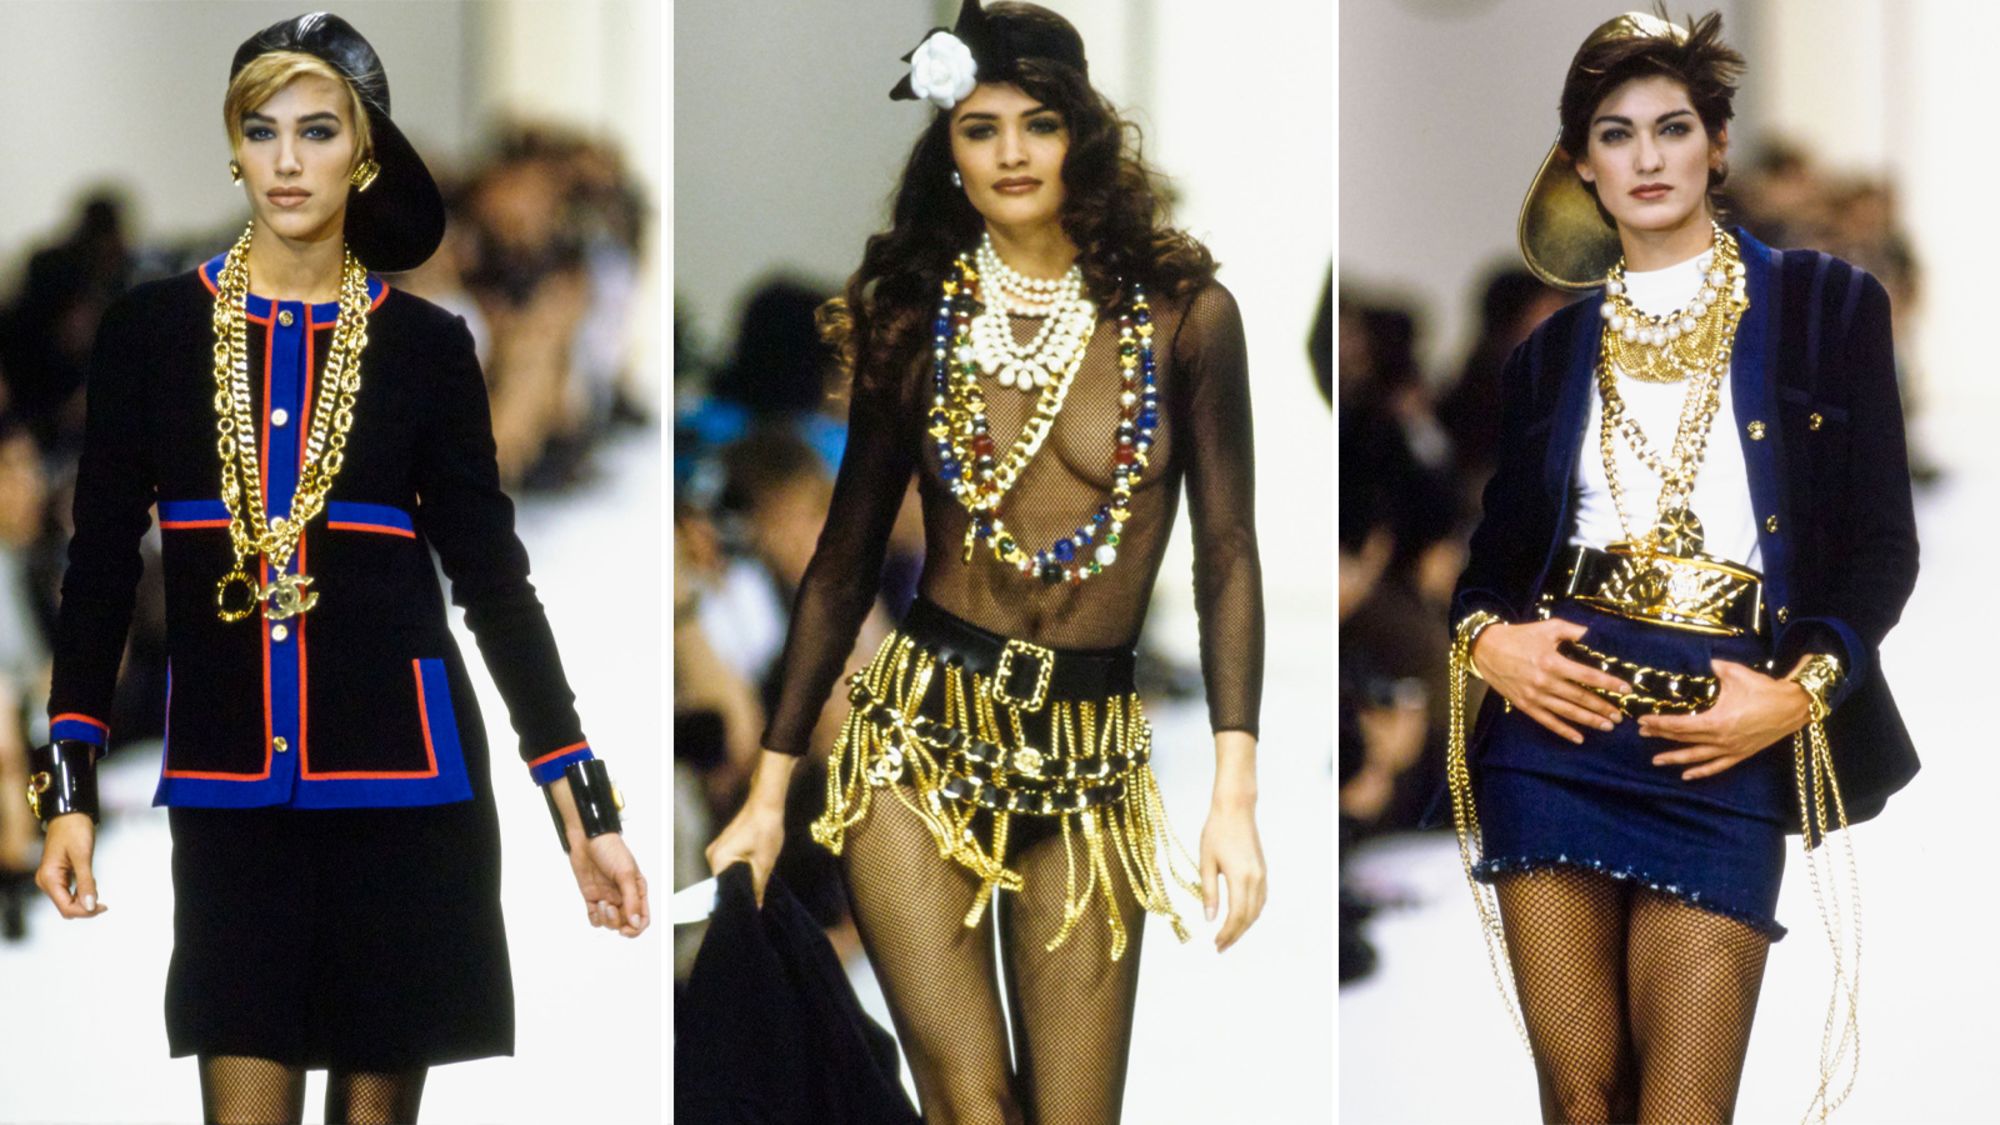 The Evolution of Chanel's Ready-To-Wear Runway Shows